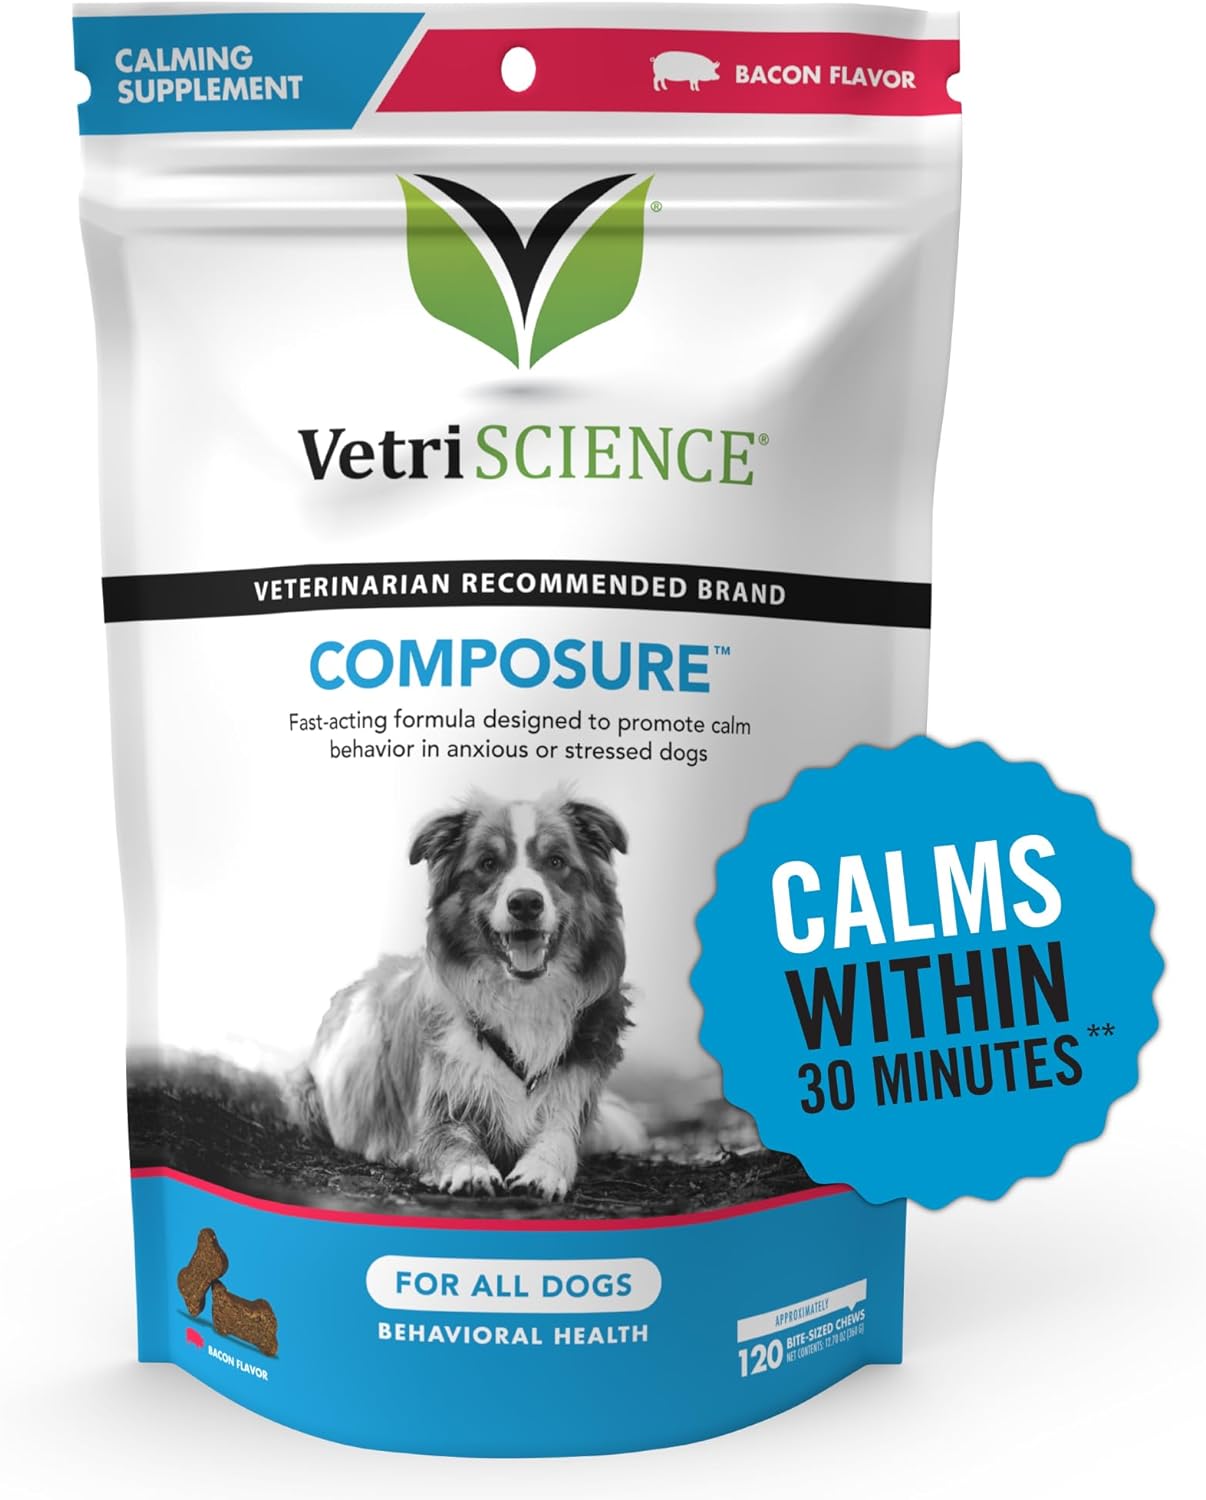 VETRISCIENCE Composure Calming Chews for Dogs - Clinically Proven Dog Anxiety Relief Supplement with Colostrum, L-Theanine & Vitamin B1 for Stress, Storms, Separation & More - 120 Count, Bacon Flavor